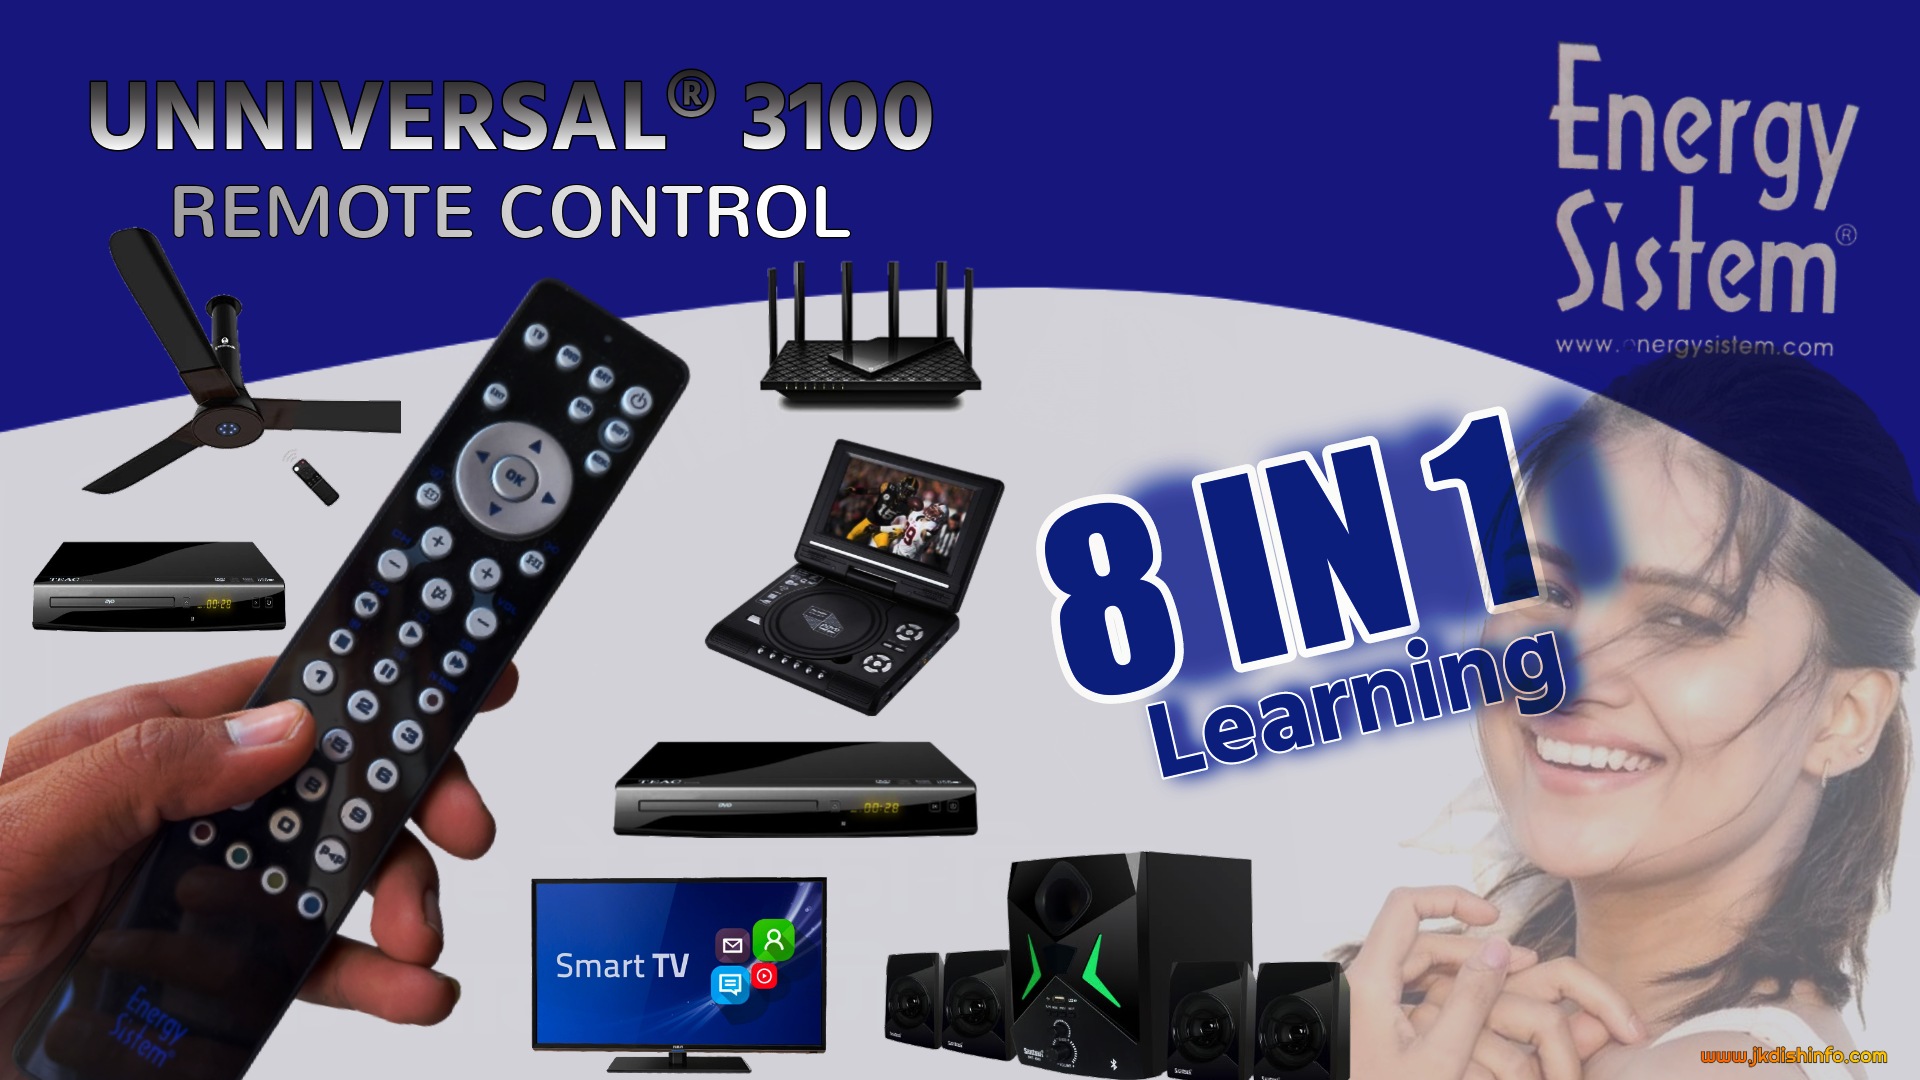 Universal 3100 Learning Zen Remote Control 8 IN 1 LEARNING